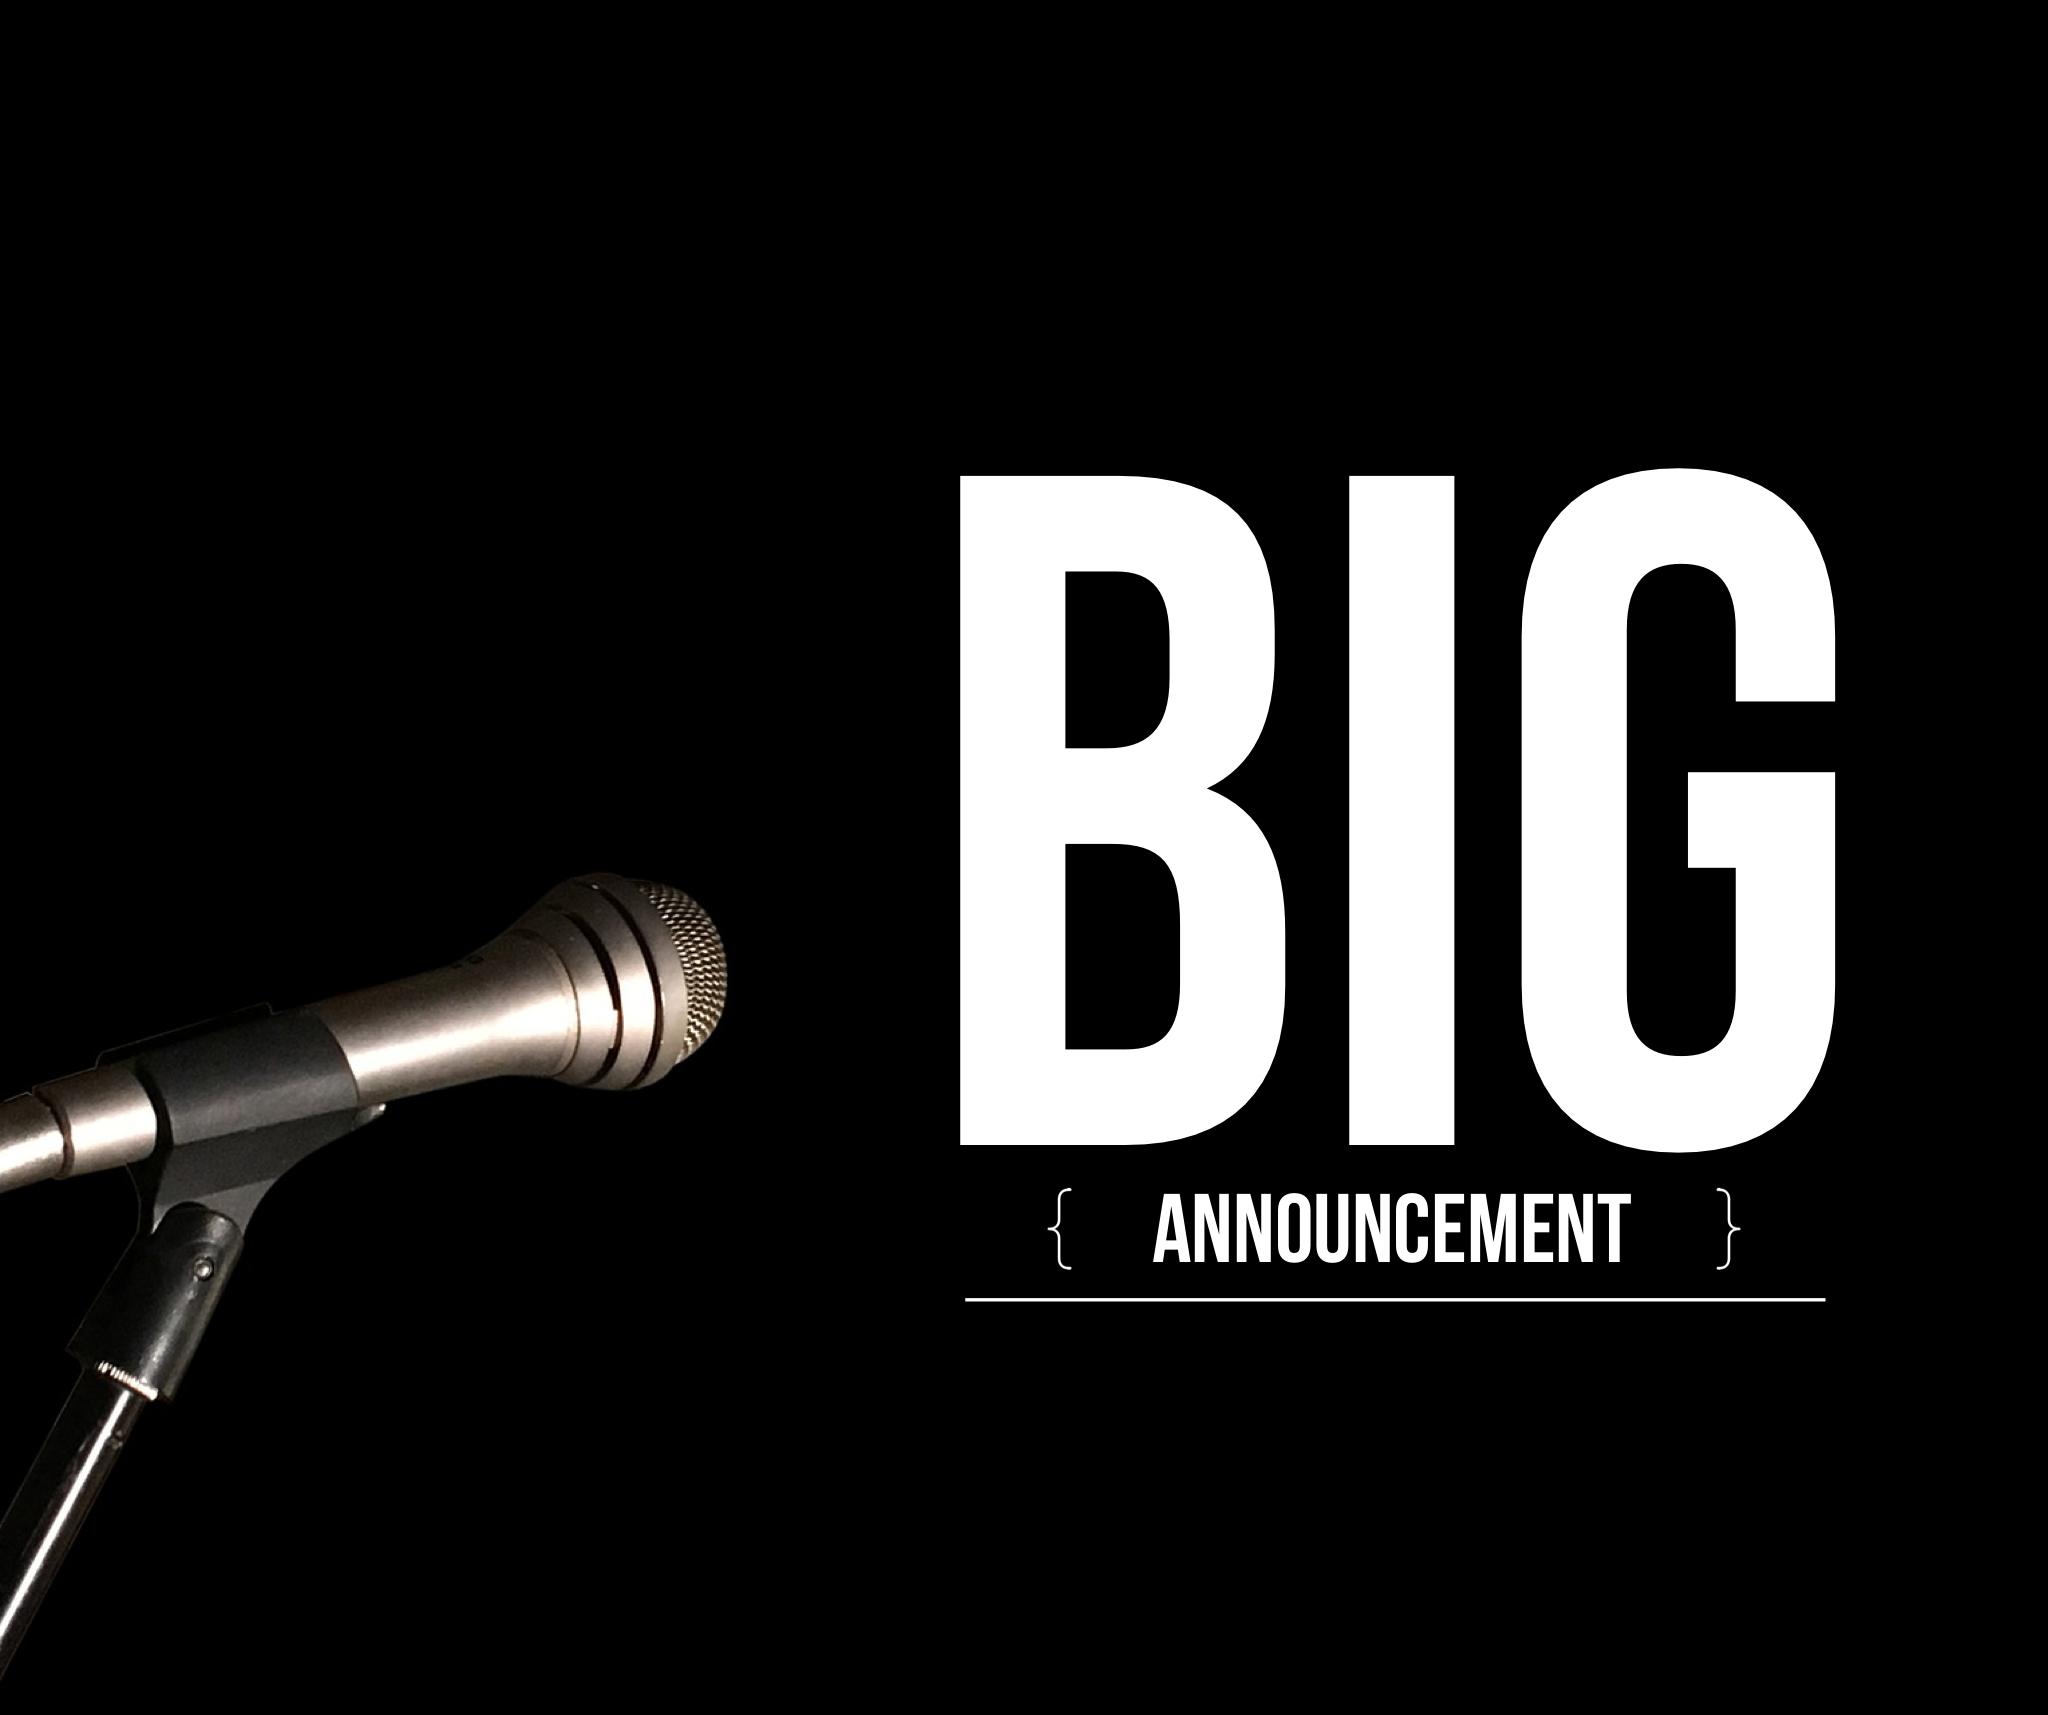 The Big Announcement